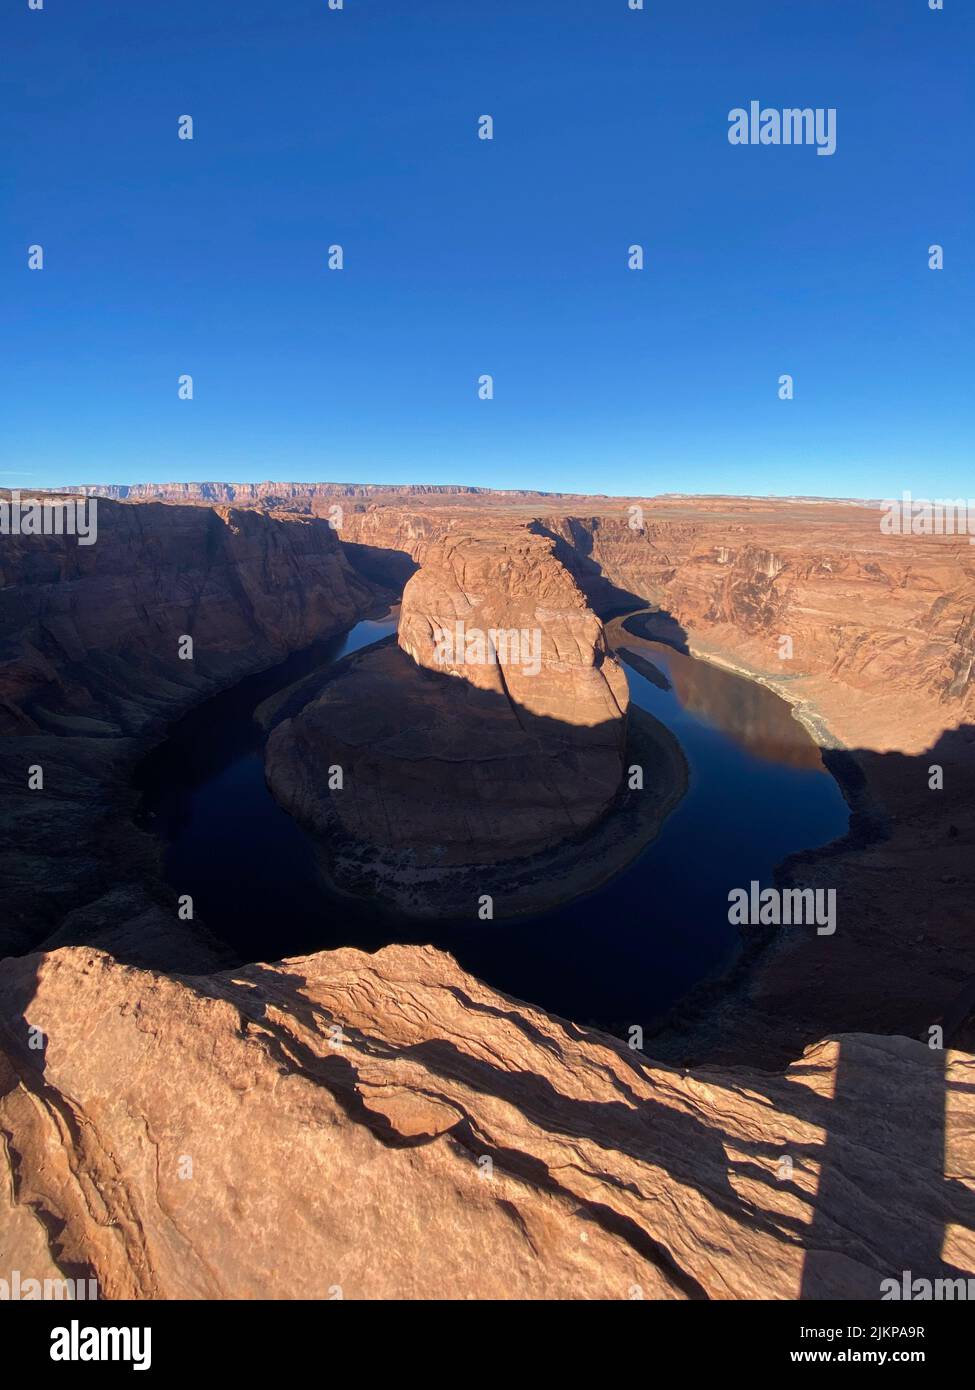 A vertical shot of Horseshoe Bend of the Colorado River in Arizona, USA Stock Photo